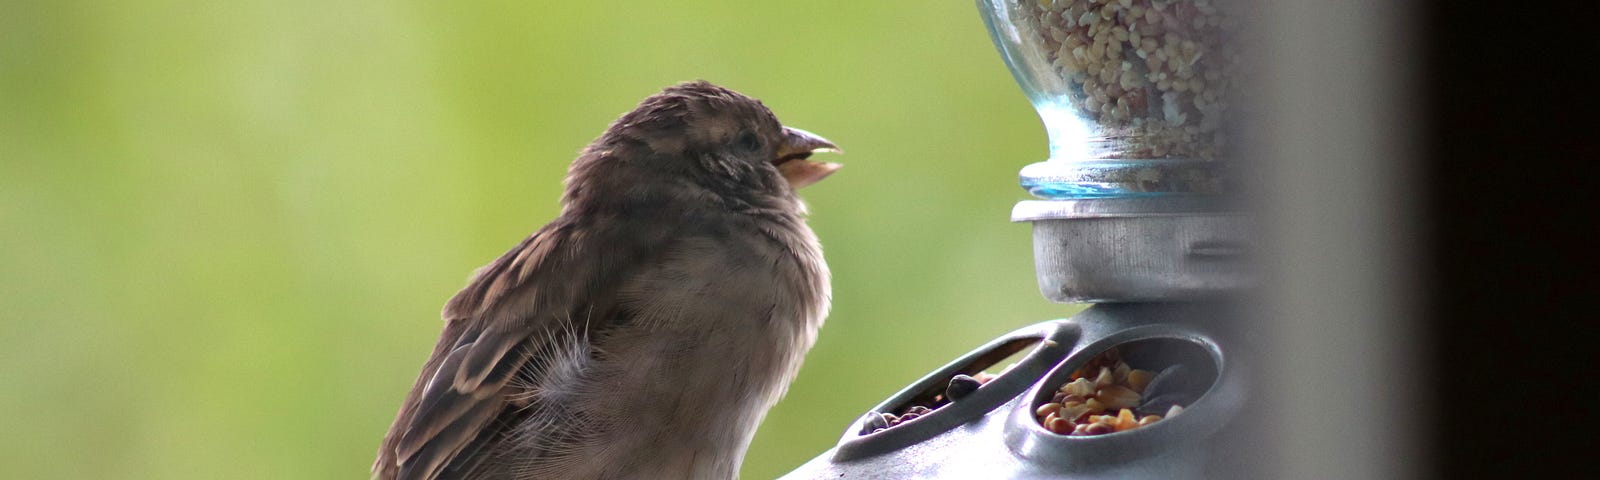 View from window of an adult female House Sparrow eating alone at a bird feeder